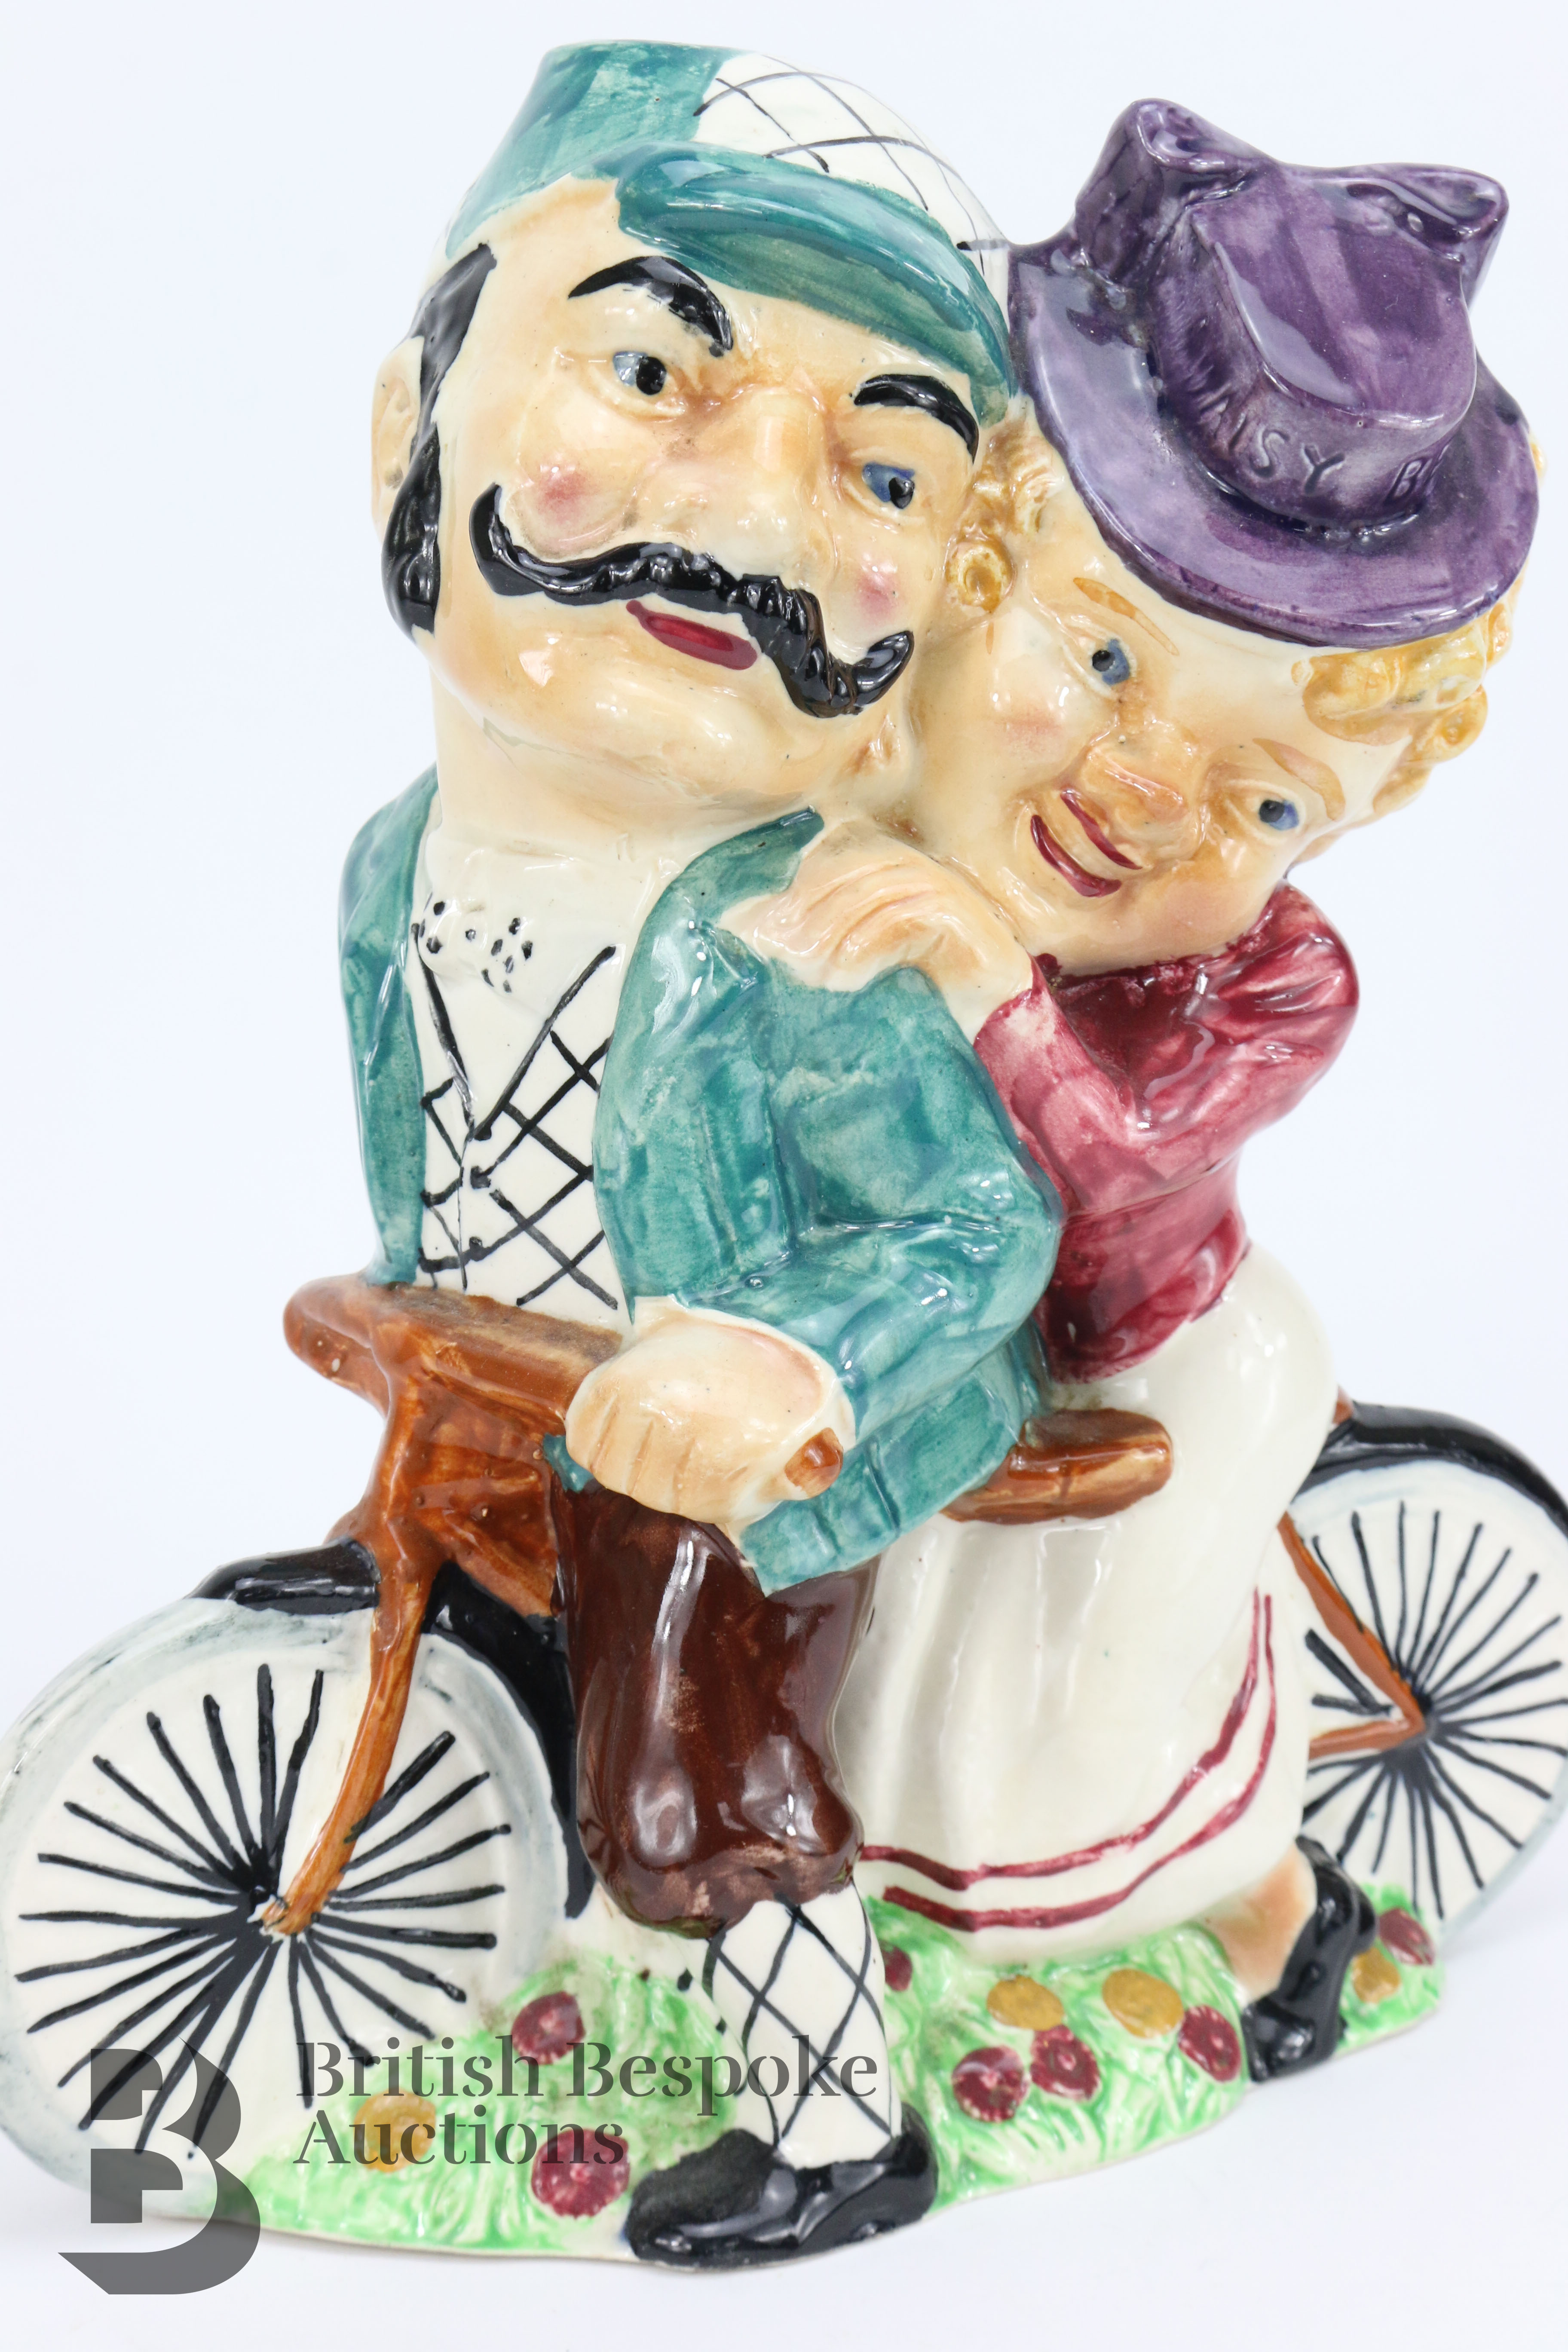 Novelty Tandem Lamp Base by Daisy Bell - Image 4 of 11